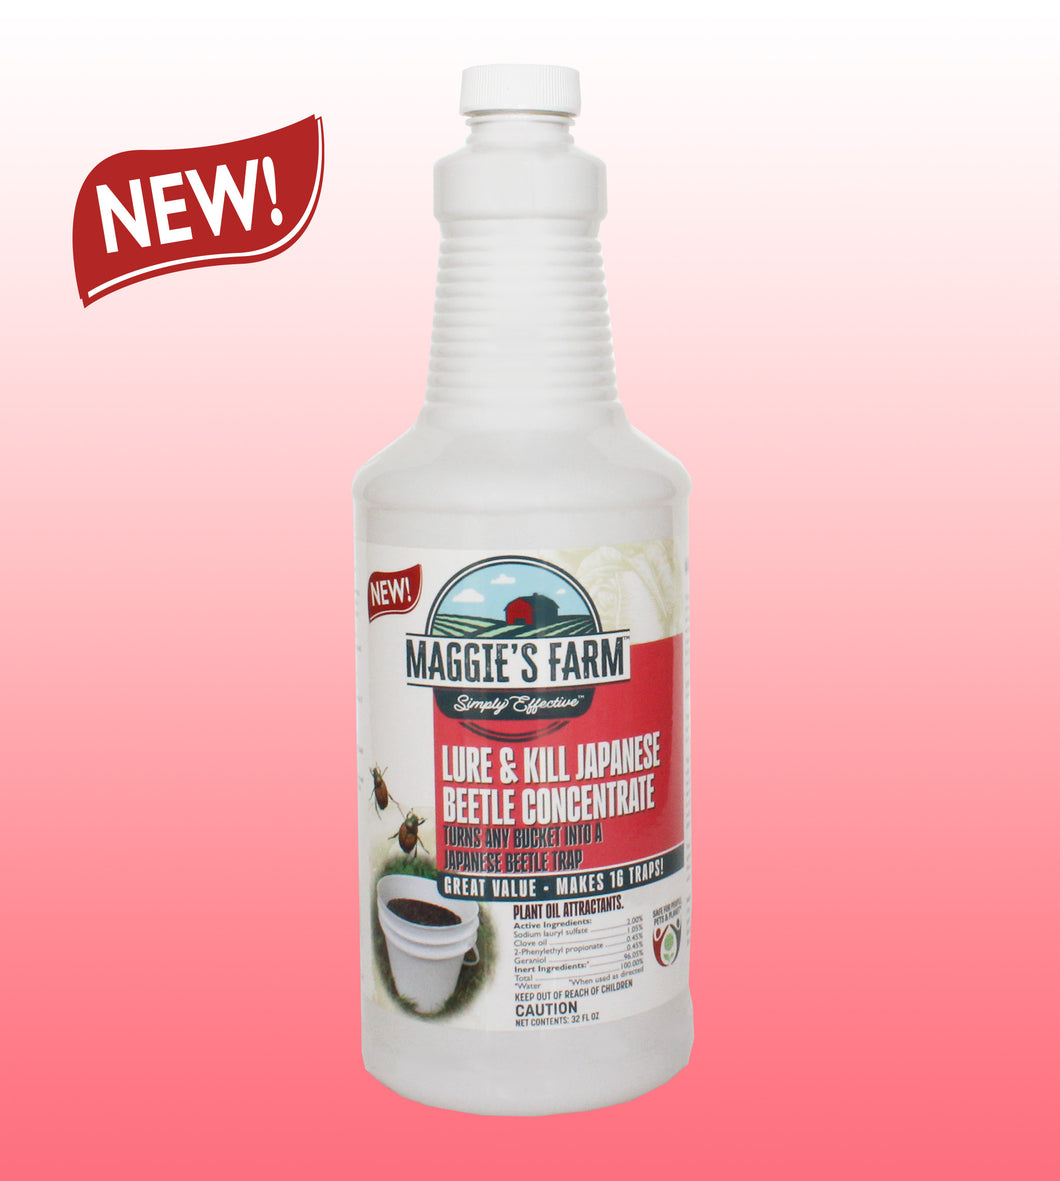 Lure & Kill Japanese Beetle Concentrate